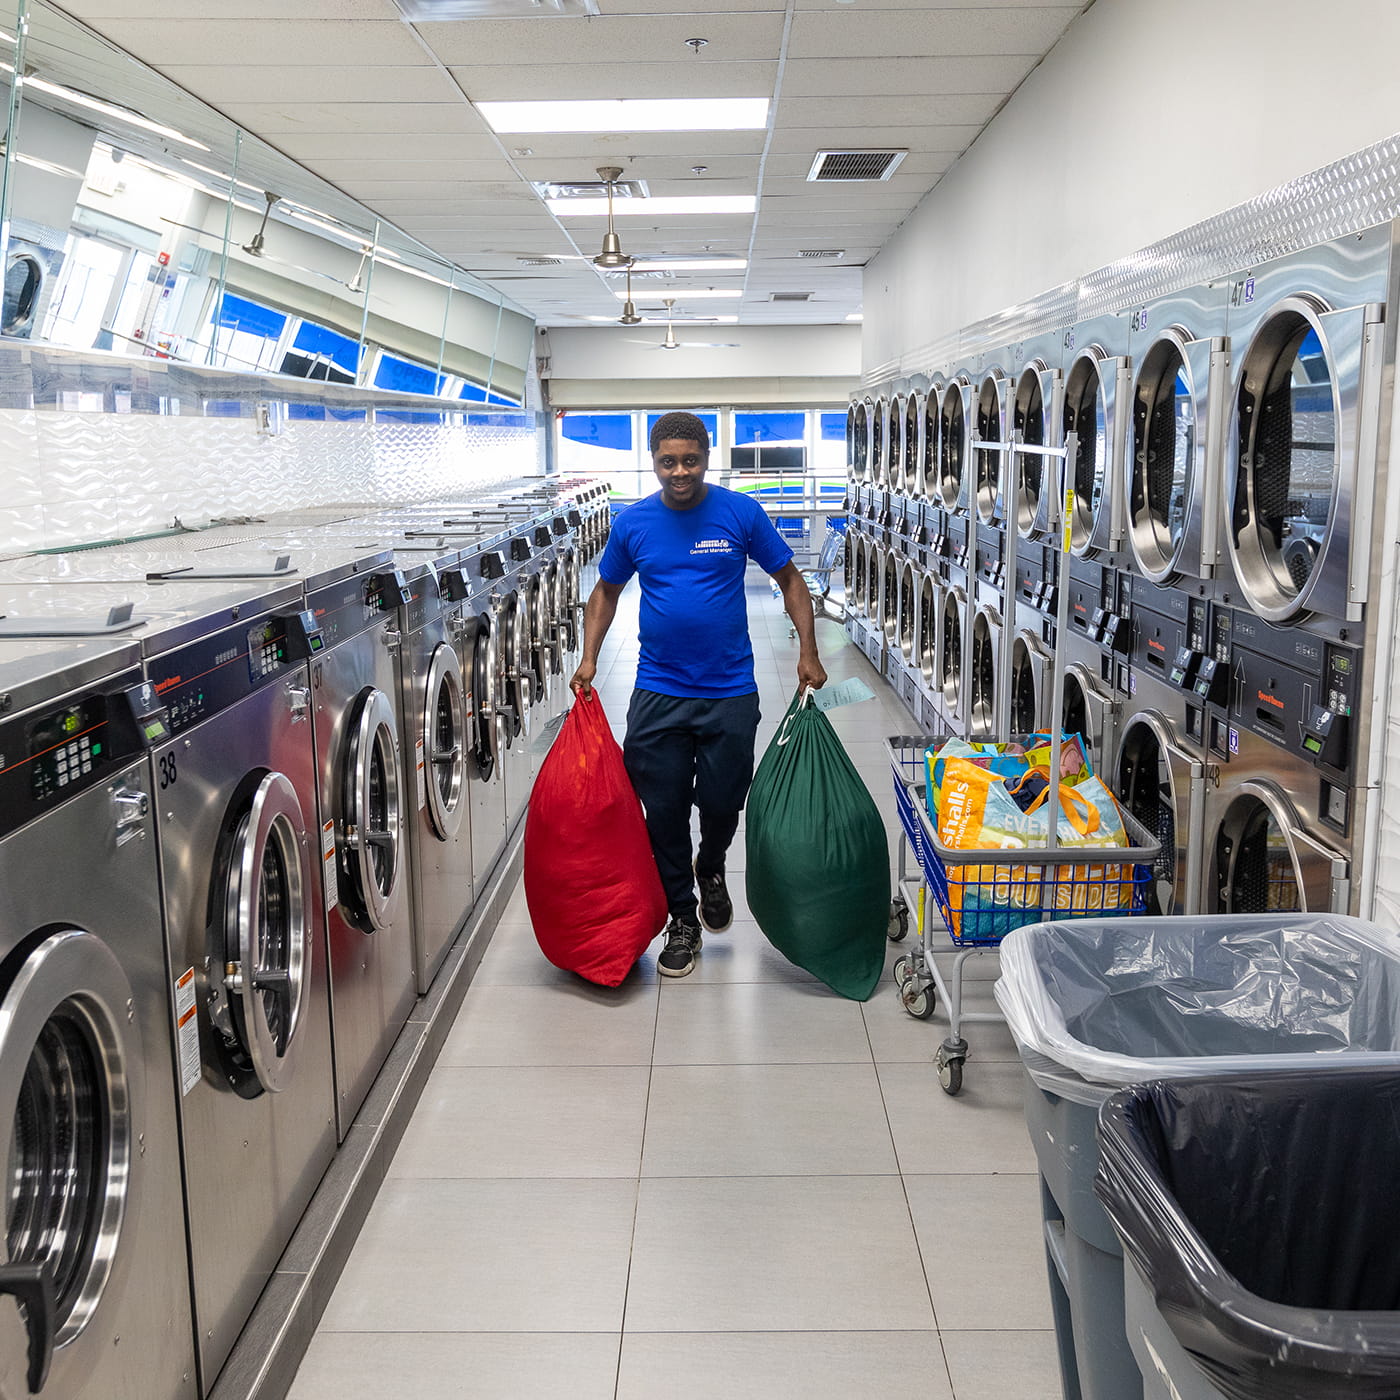 South Orange Residential and Commercial Laundry Services